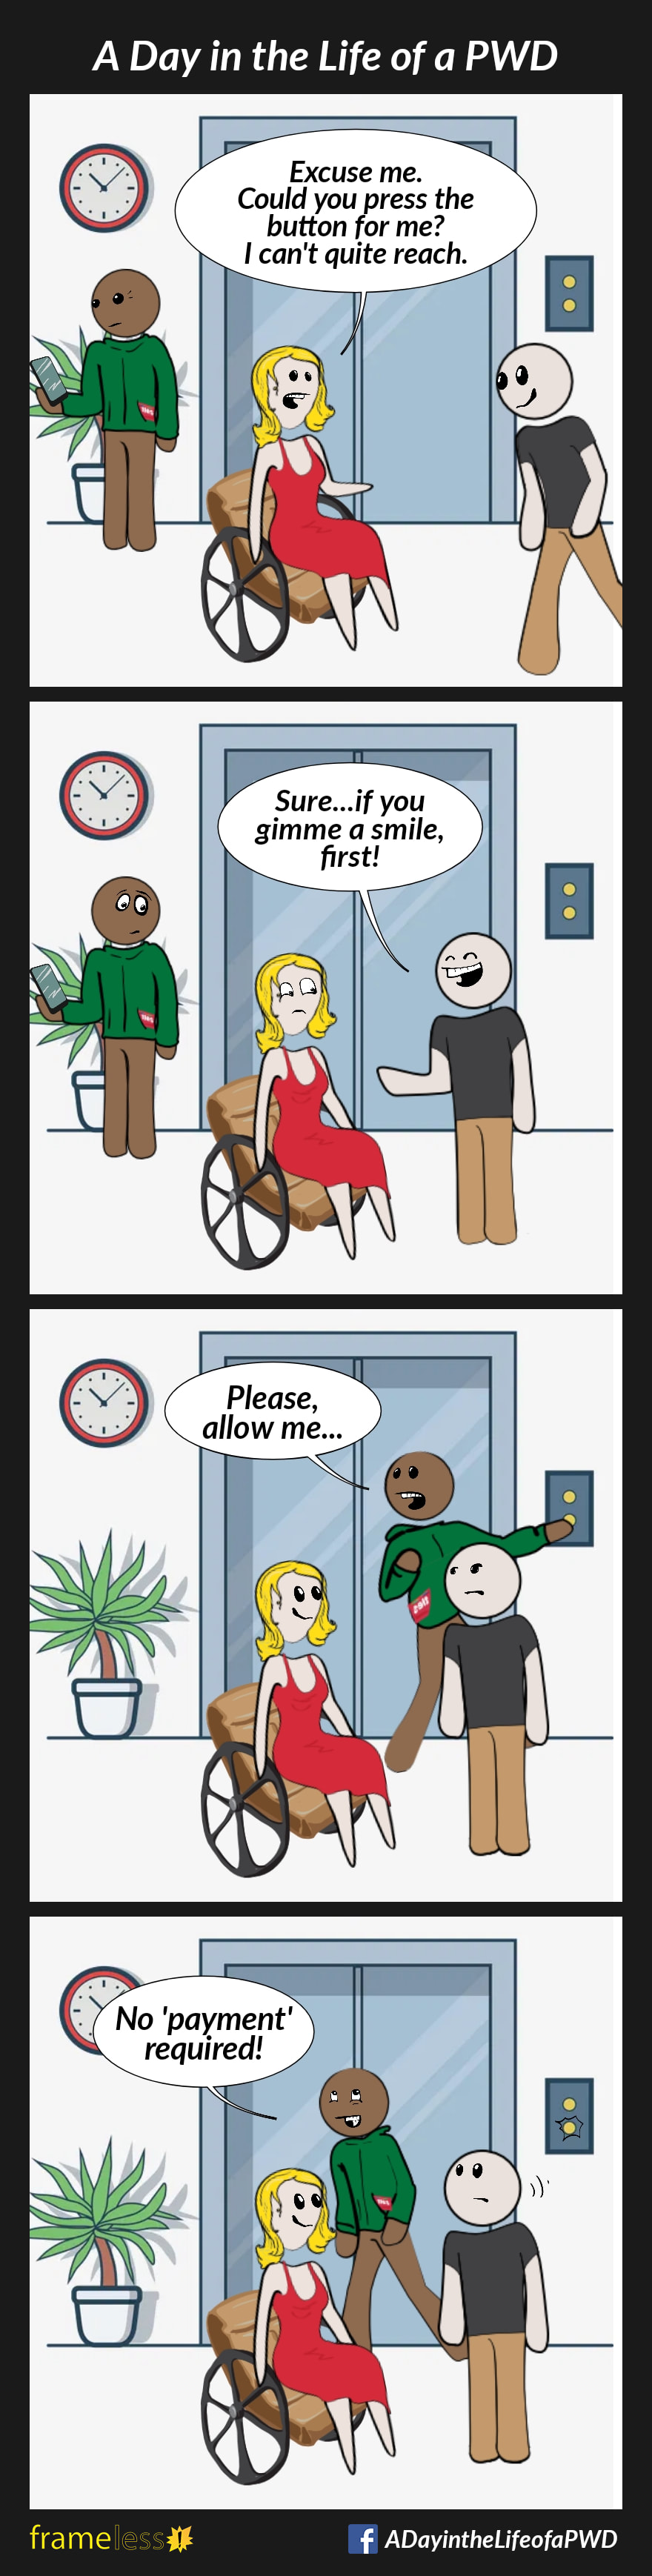 COMIC STRIP 
A Day in the Life of a PWD (Person With a Disability) 

Frame 1:
A woman in a wheelchair wants to use the elevator. She stops a man walking by.
WOMAN: Excuse me. Could you press the button for me? I can’t quite reach.

Frame 2:
MAN (grinning): Sure...if you gimme a smile first! 
A gentleman standing nearby overhears.

Frame 3:
GENTLEMAN: Please, allow me.
The gentleman presses the elevator button.

Frame 4:
GENTLEMAN: No 'payment' required.